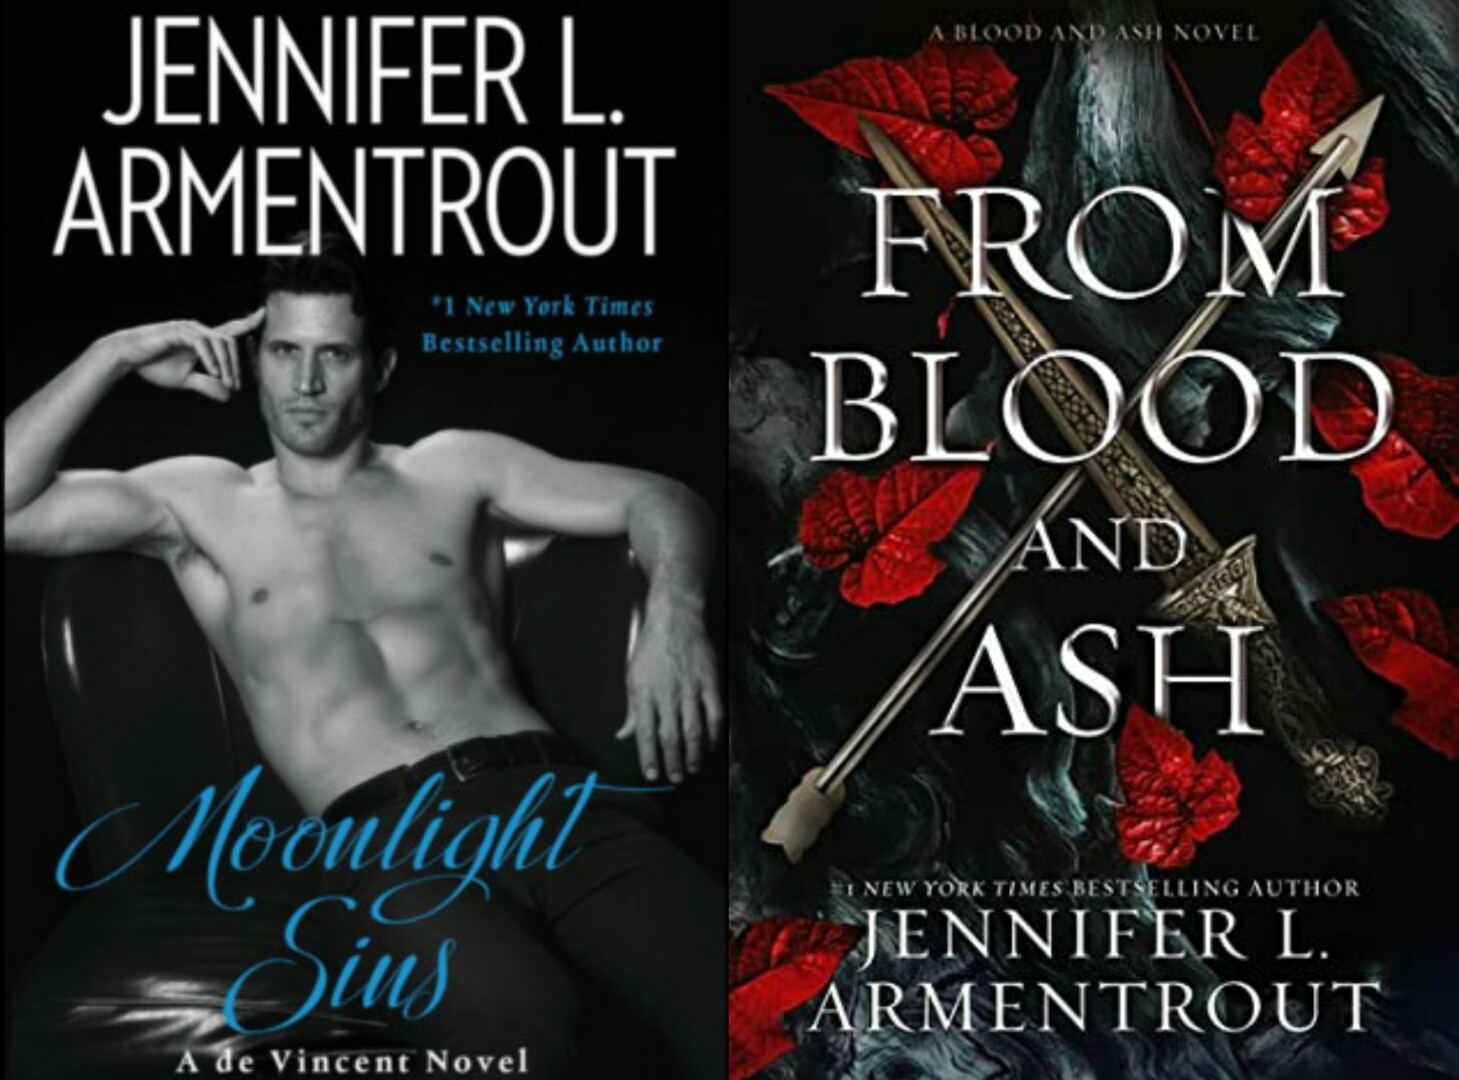 jennifer armentrout from blood and ash